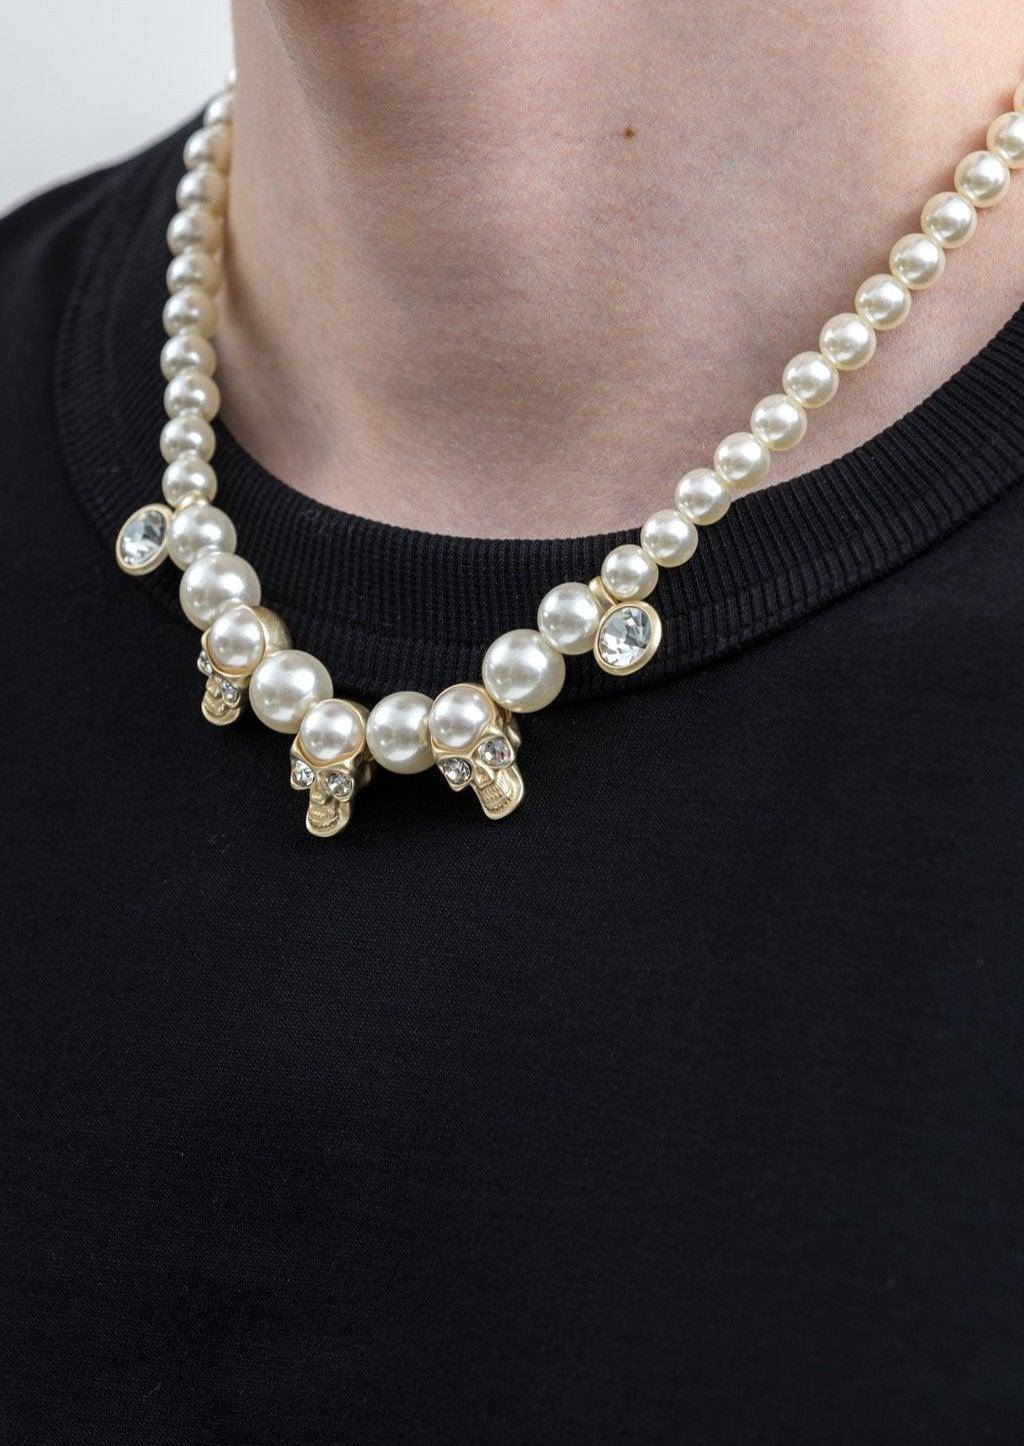 EVAE+ Pearl And Skull Necklace - Mores Studio